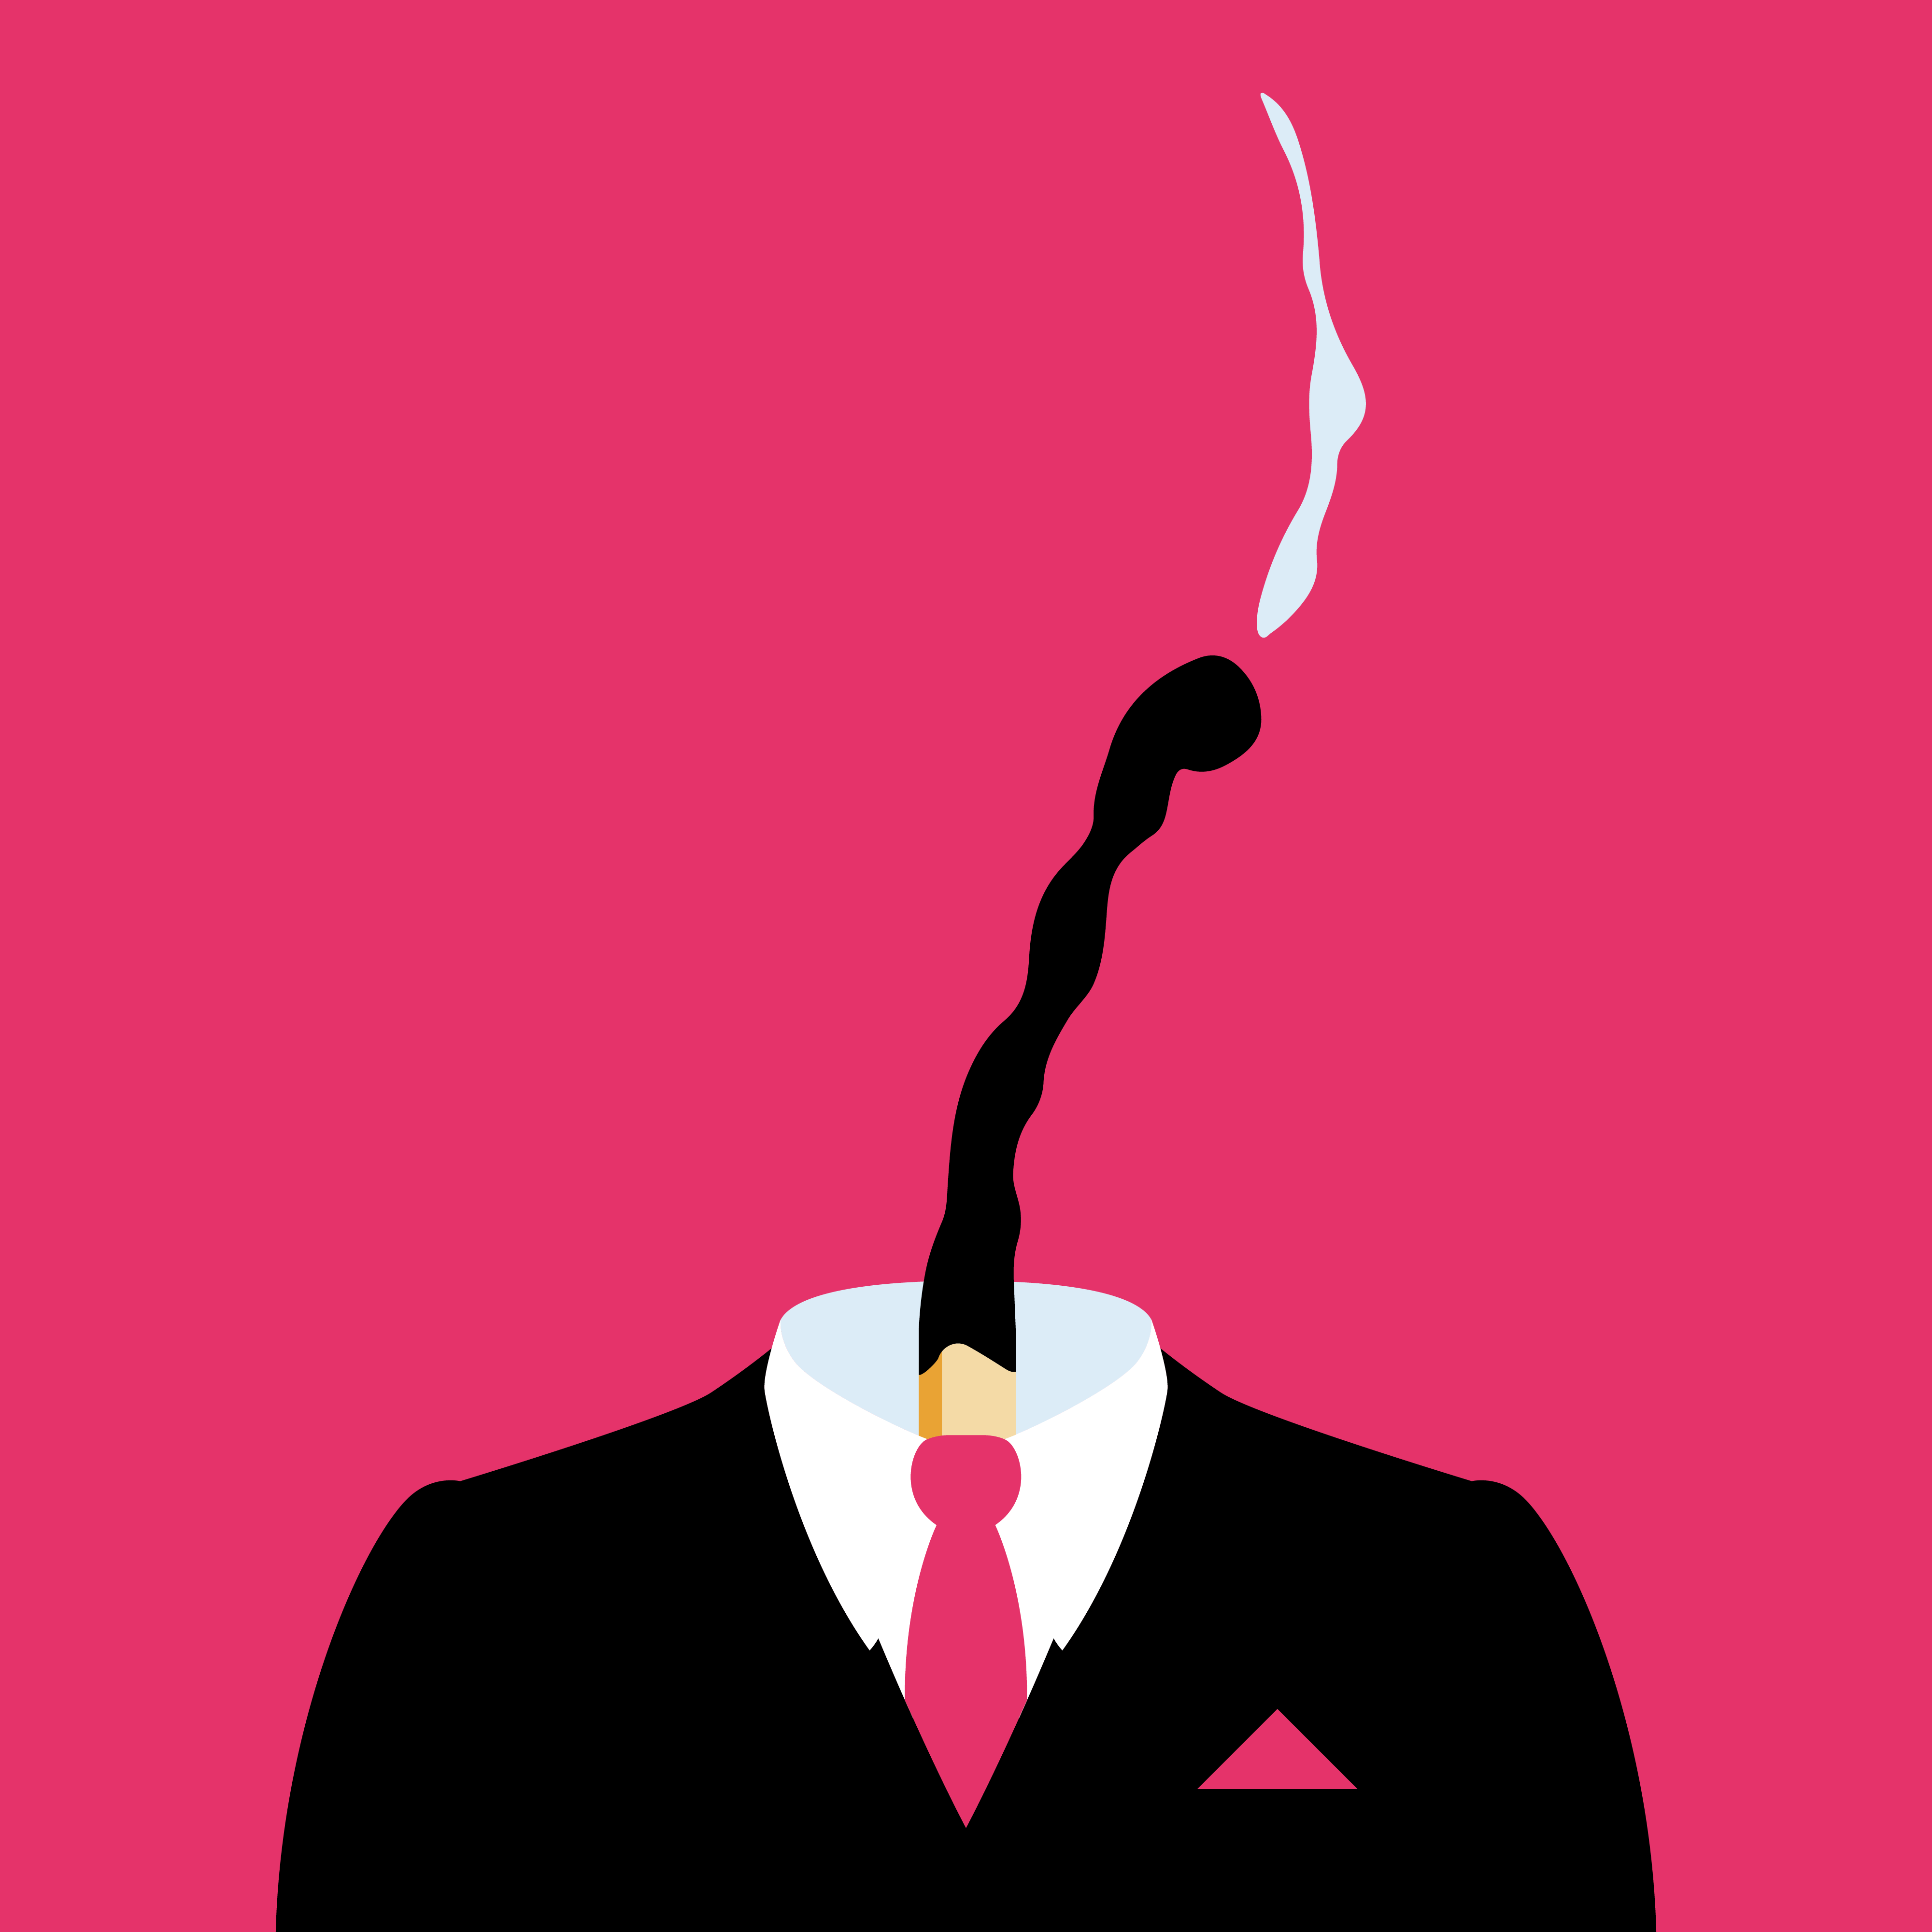 Minimalist vector art illustration of a man in a suit with a burnt out match as the head by digital artist Baz Grafton.